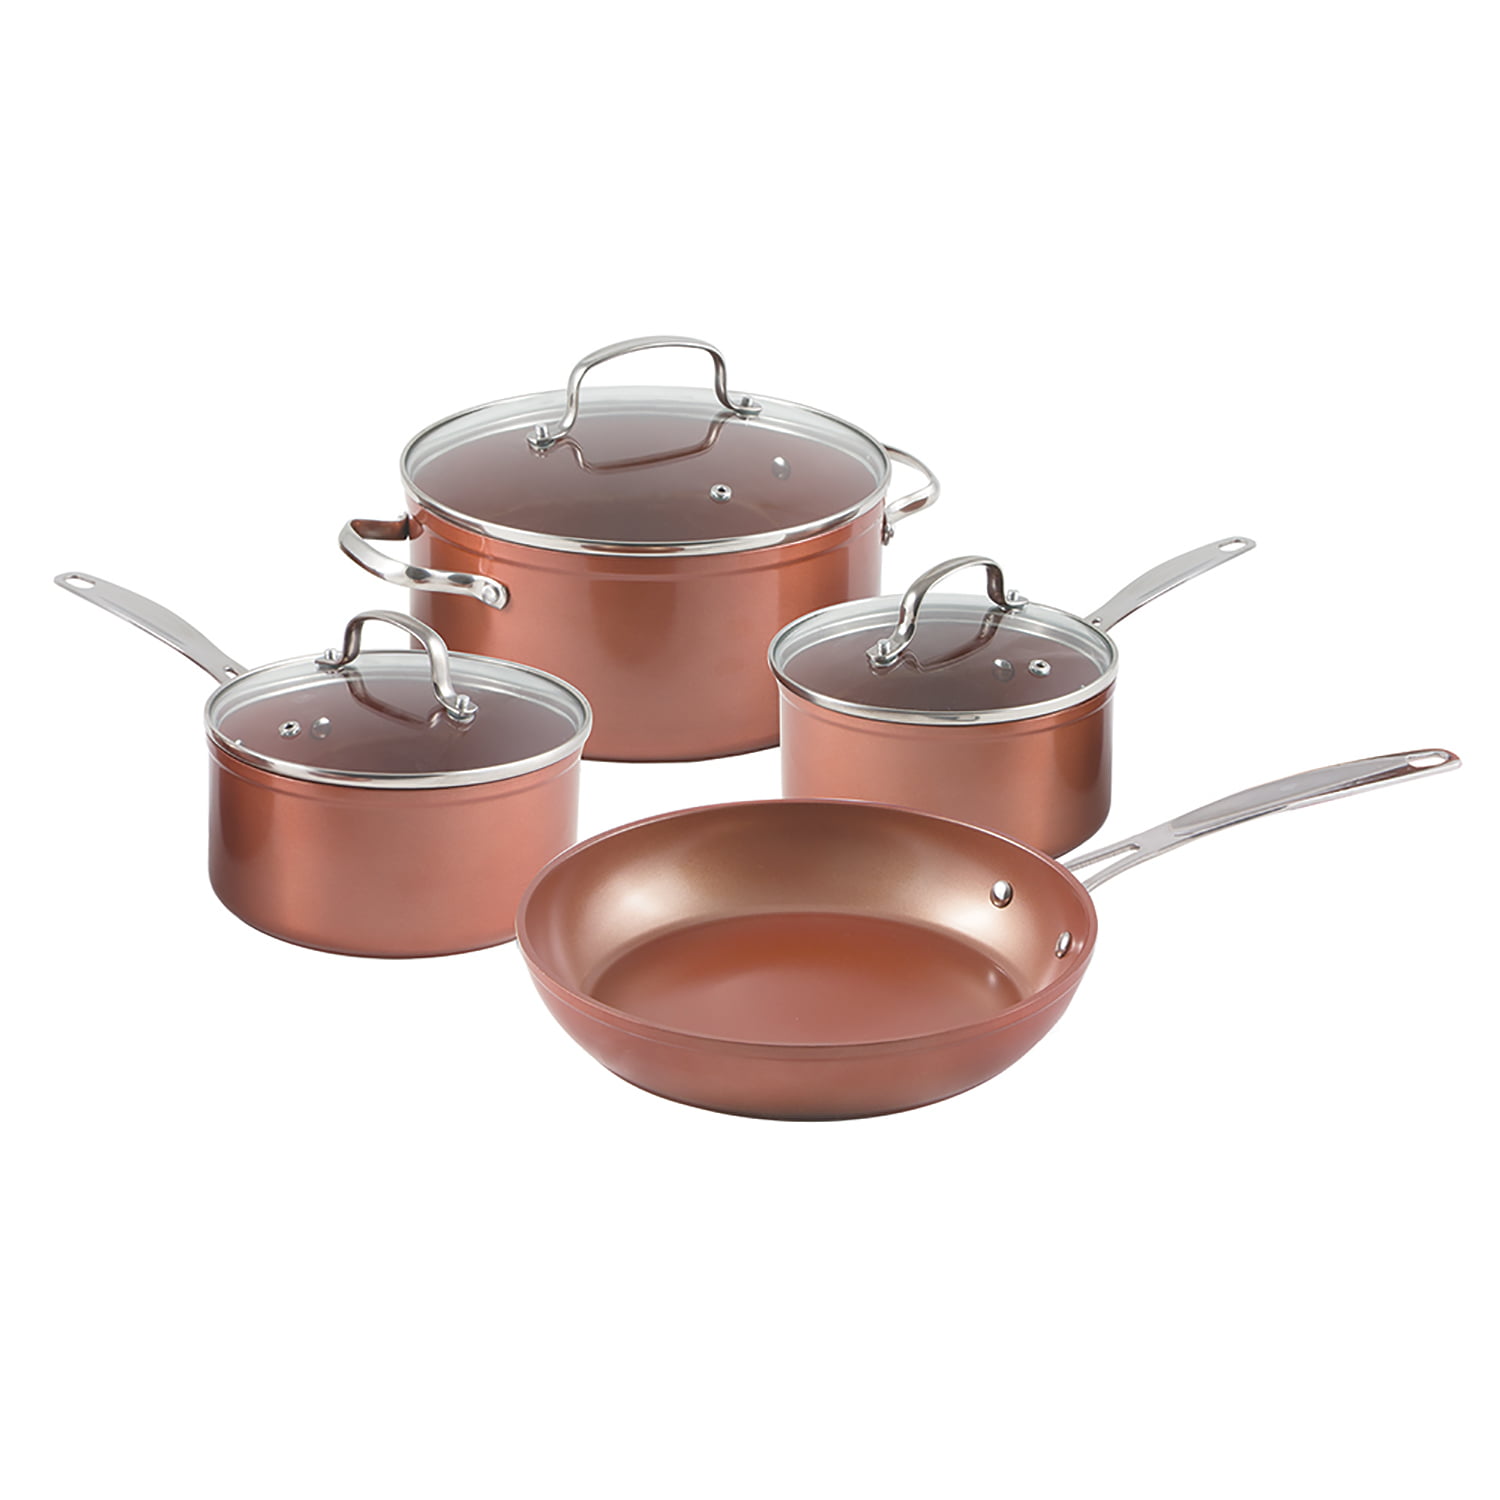 Up To 33% Off on NuWave Cookware Set (7-Pc)